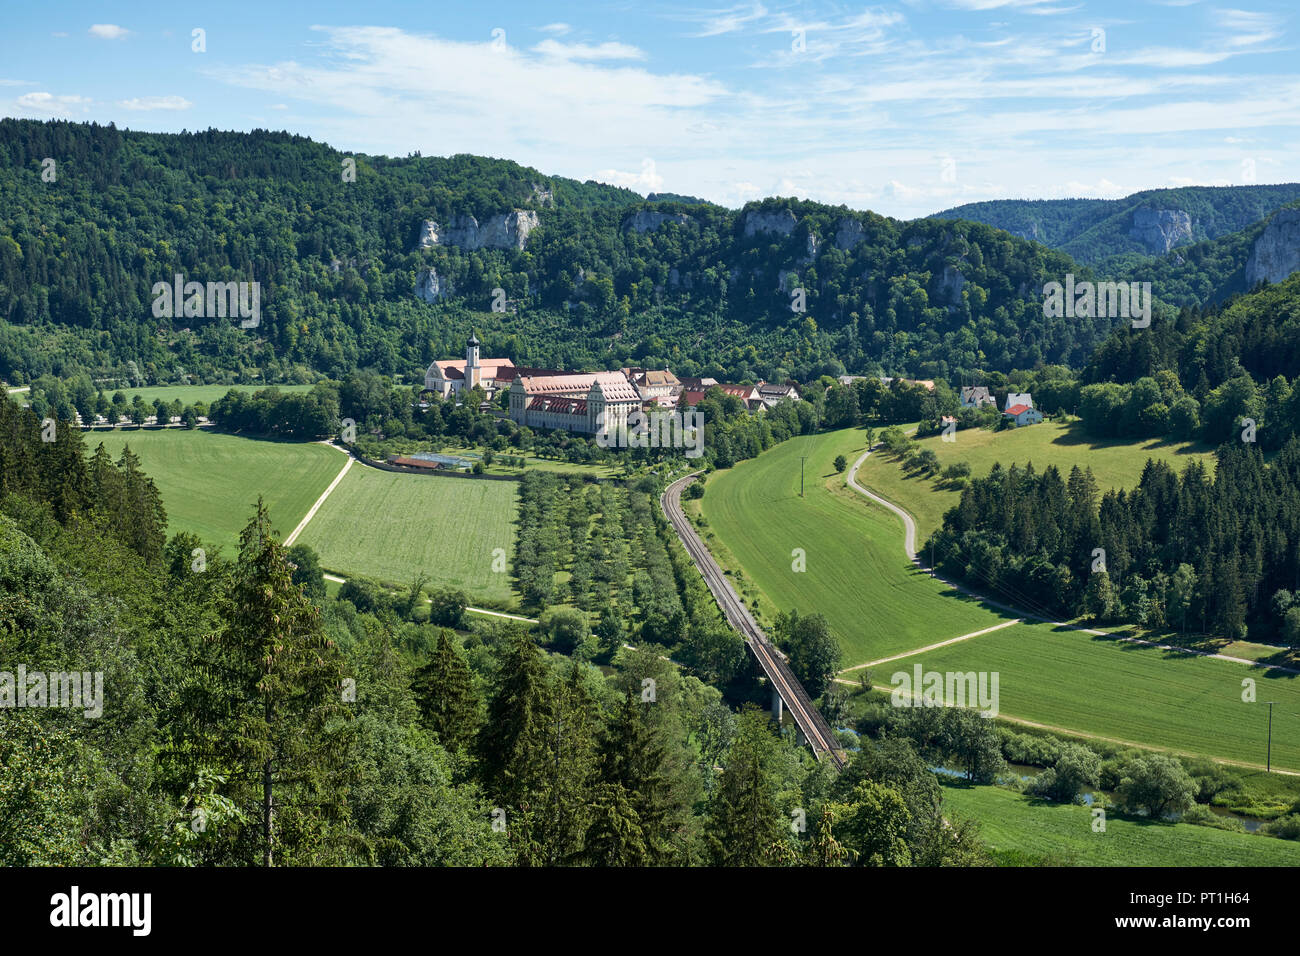 Germany, Baden-Wurttemberg, Tuttlingen district, Danube valley with Beuron monstery Stock Photo